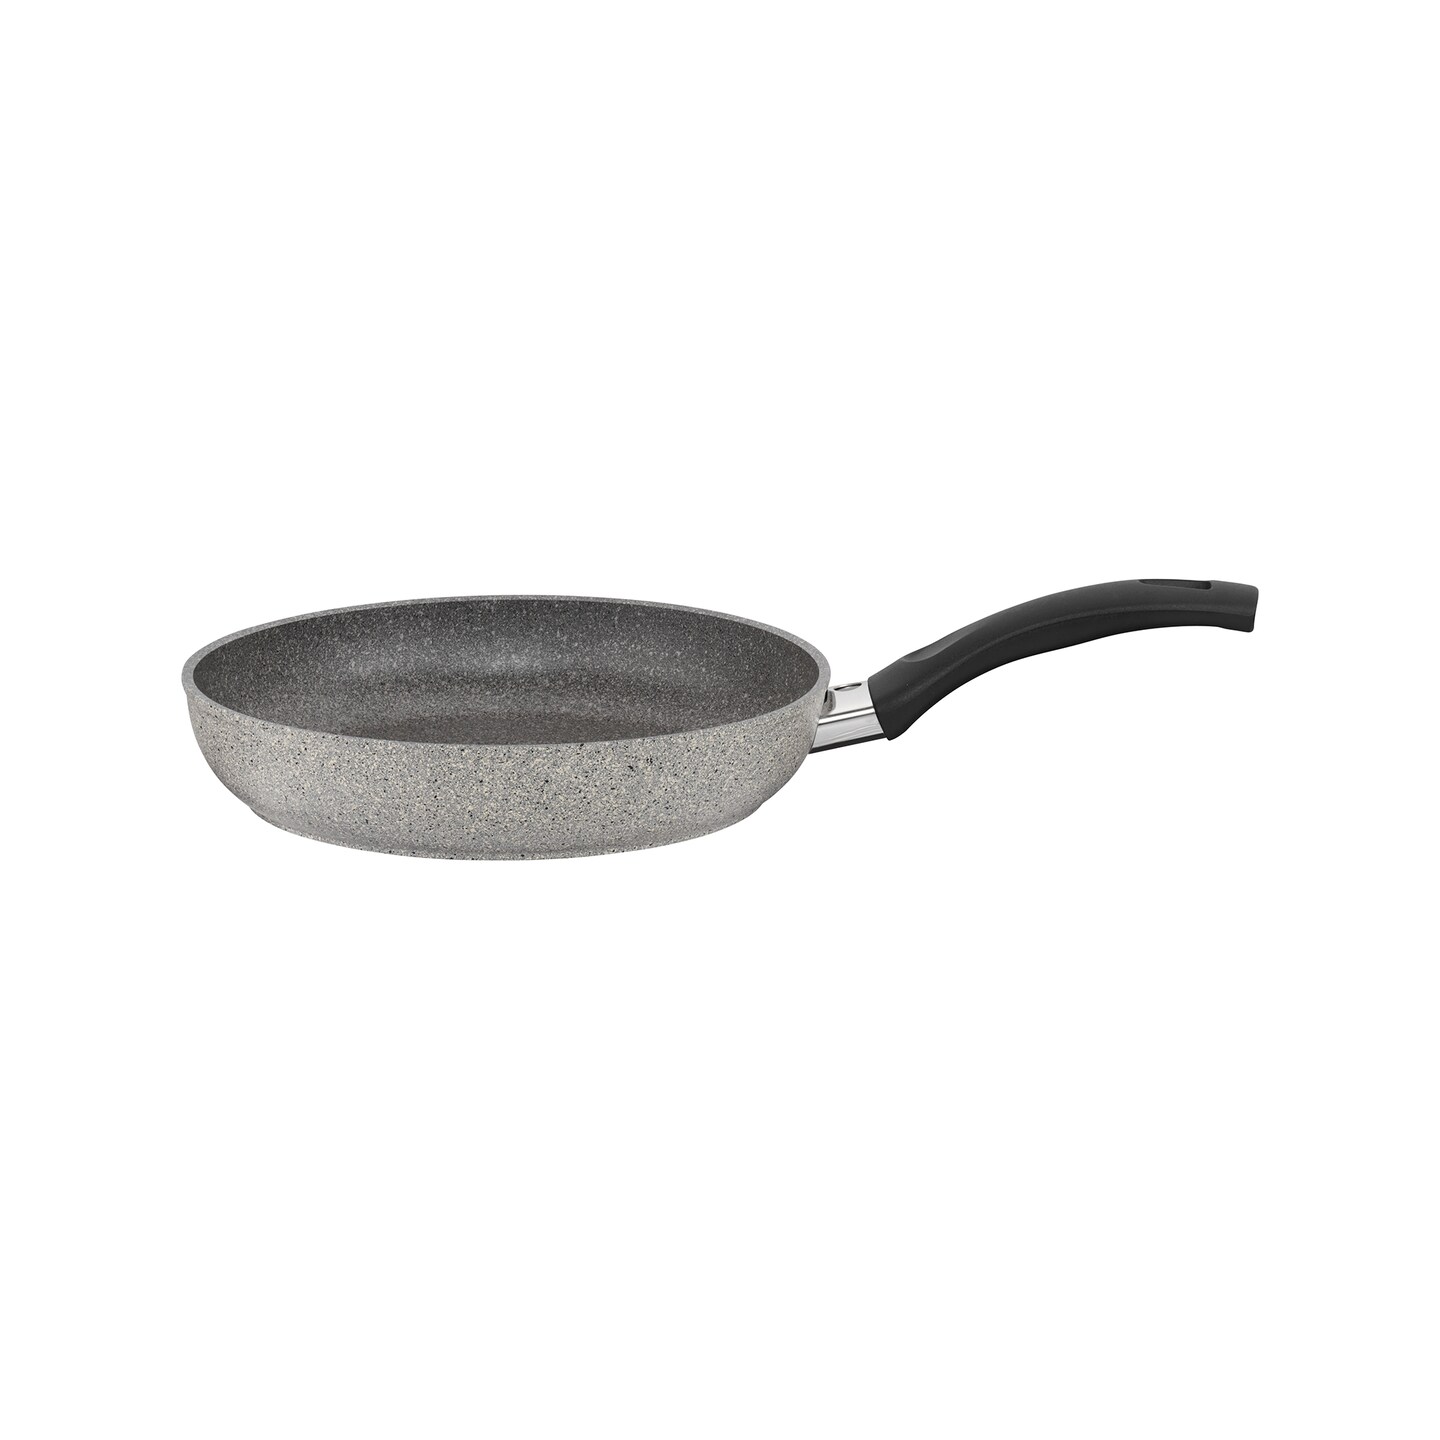 BALLARINI Parma by HENCKELS Forged Aluminum Nonstick Fry Pan, Made in Italy